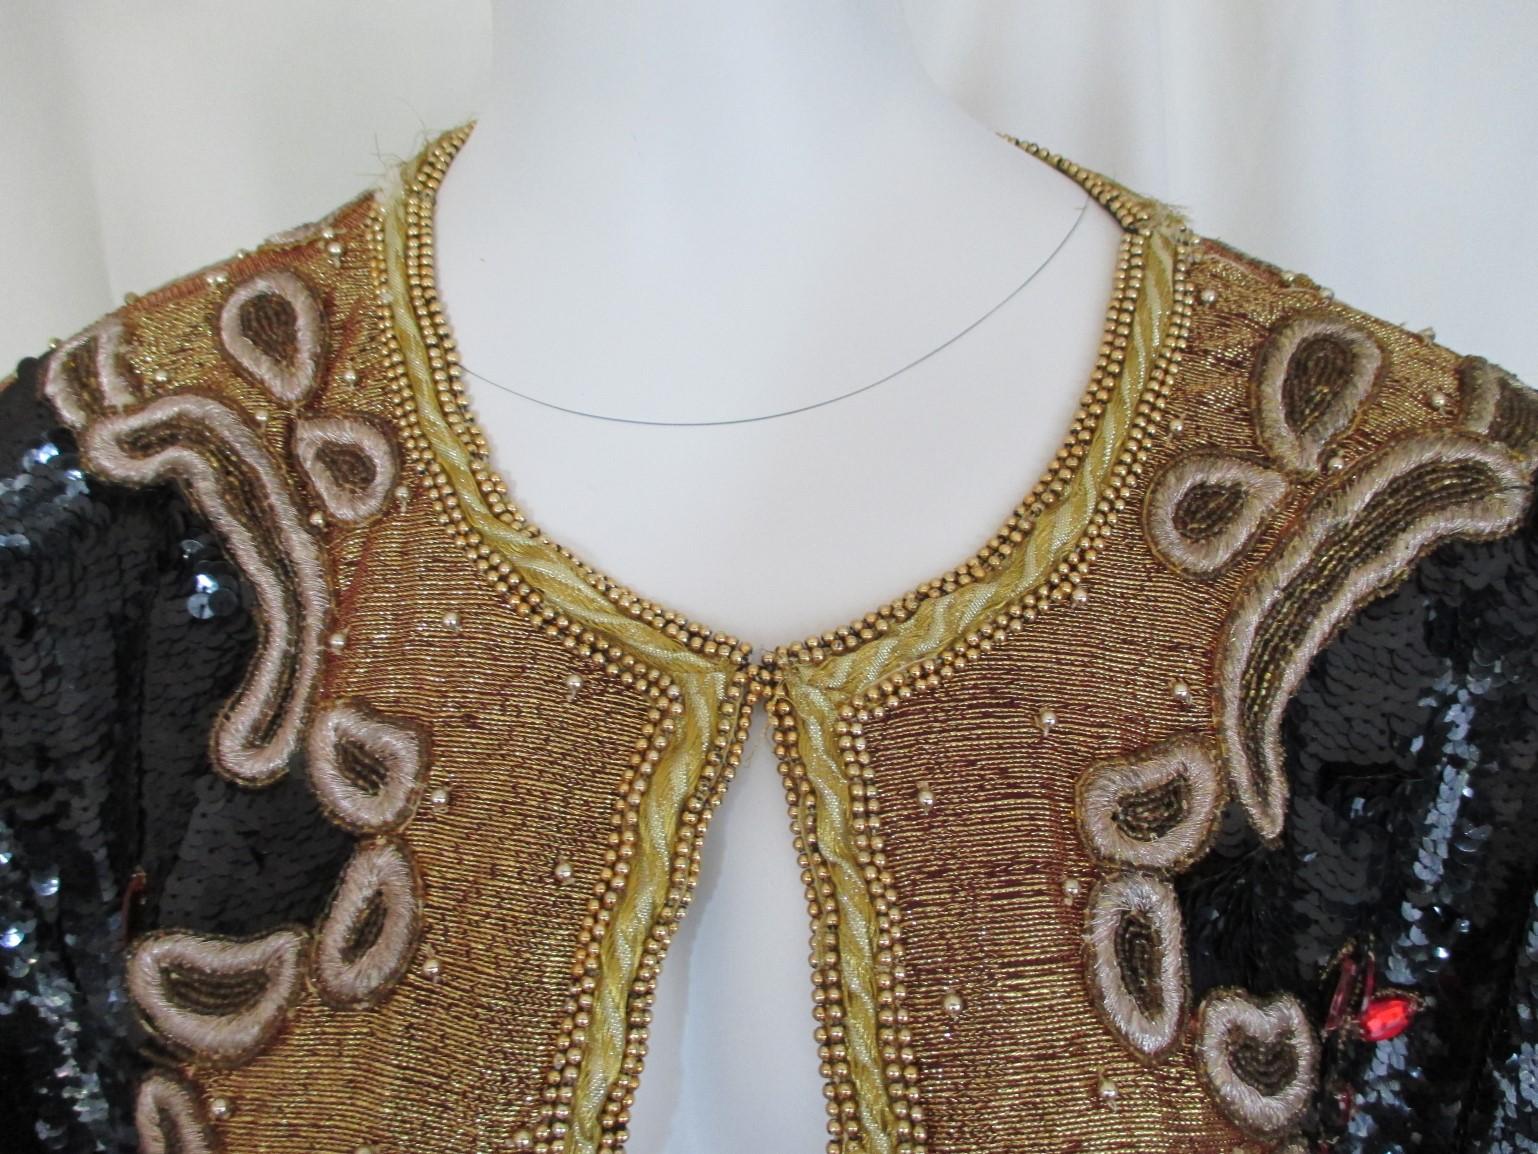 This exclusive vintage evening jacket with 6 front closing hooks, is embroided with red stones, black sequins, gold embroidered and has shoulder pads.
Its in fair pre-owned condition with some wear at the collar and stones.
Appears to be